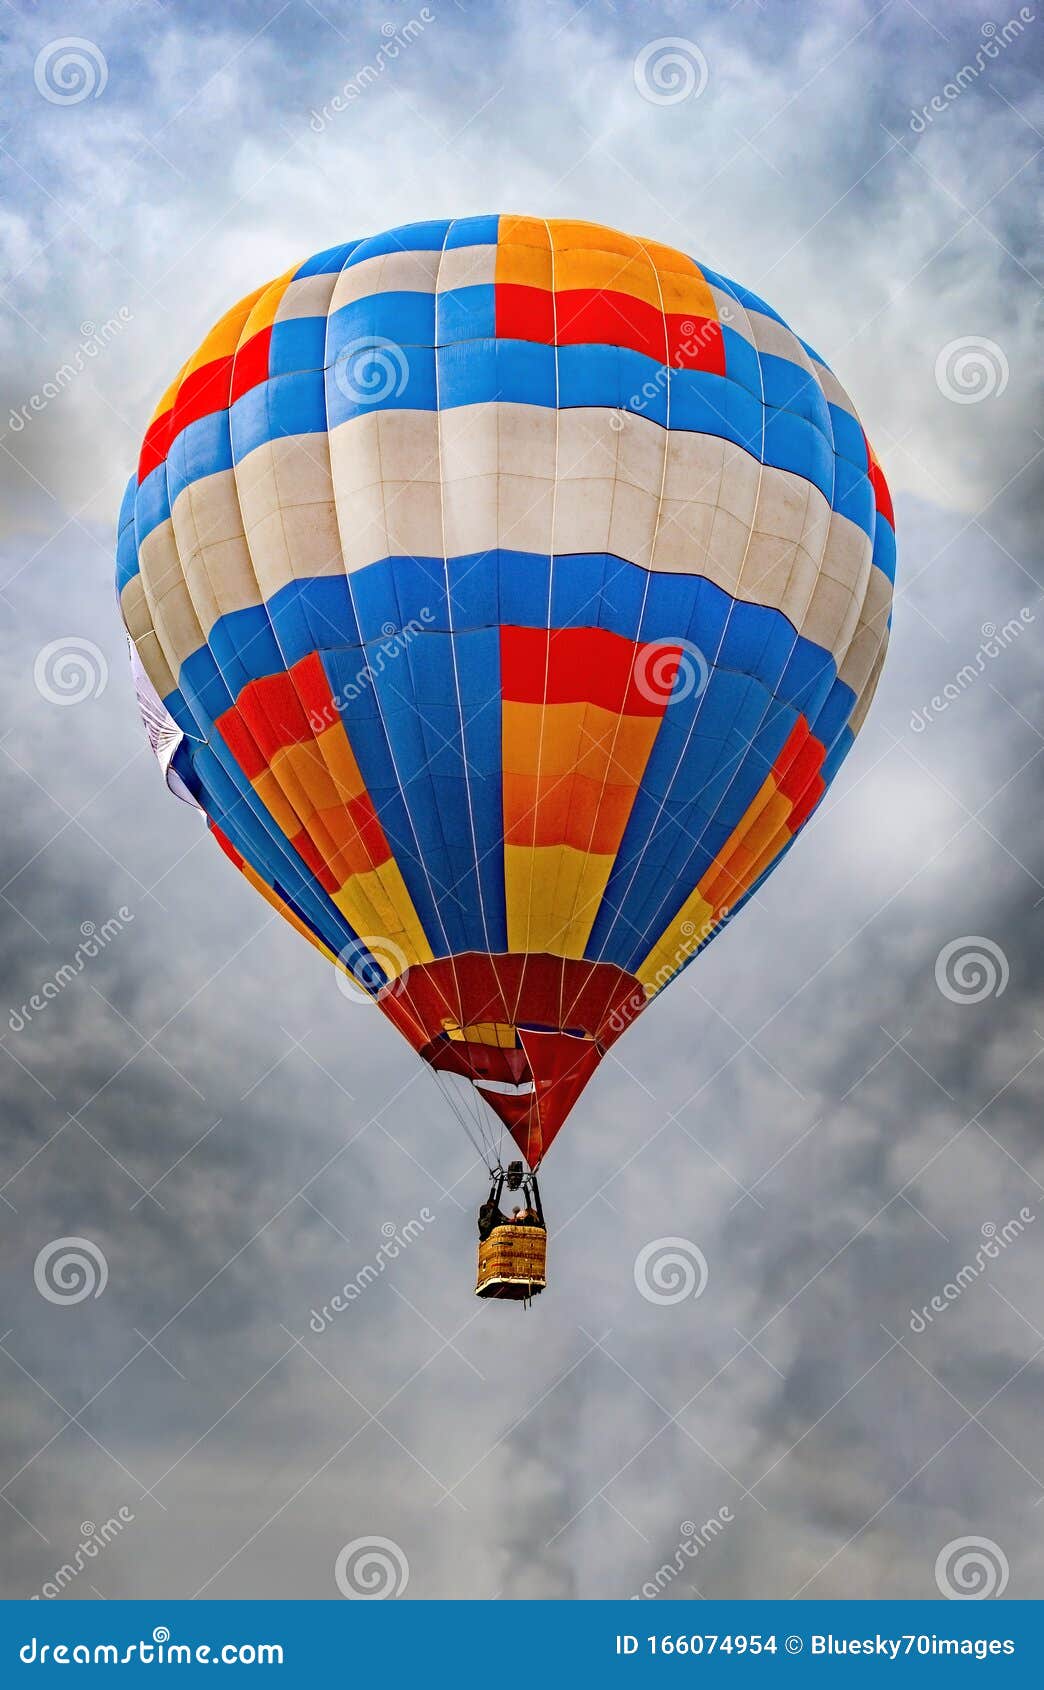 colorful airballoon in a dangerous flight